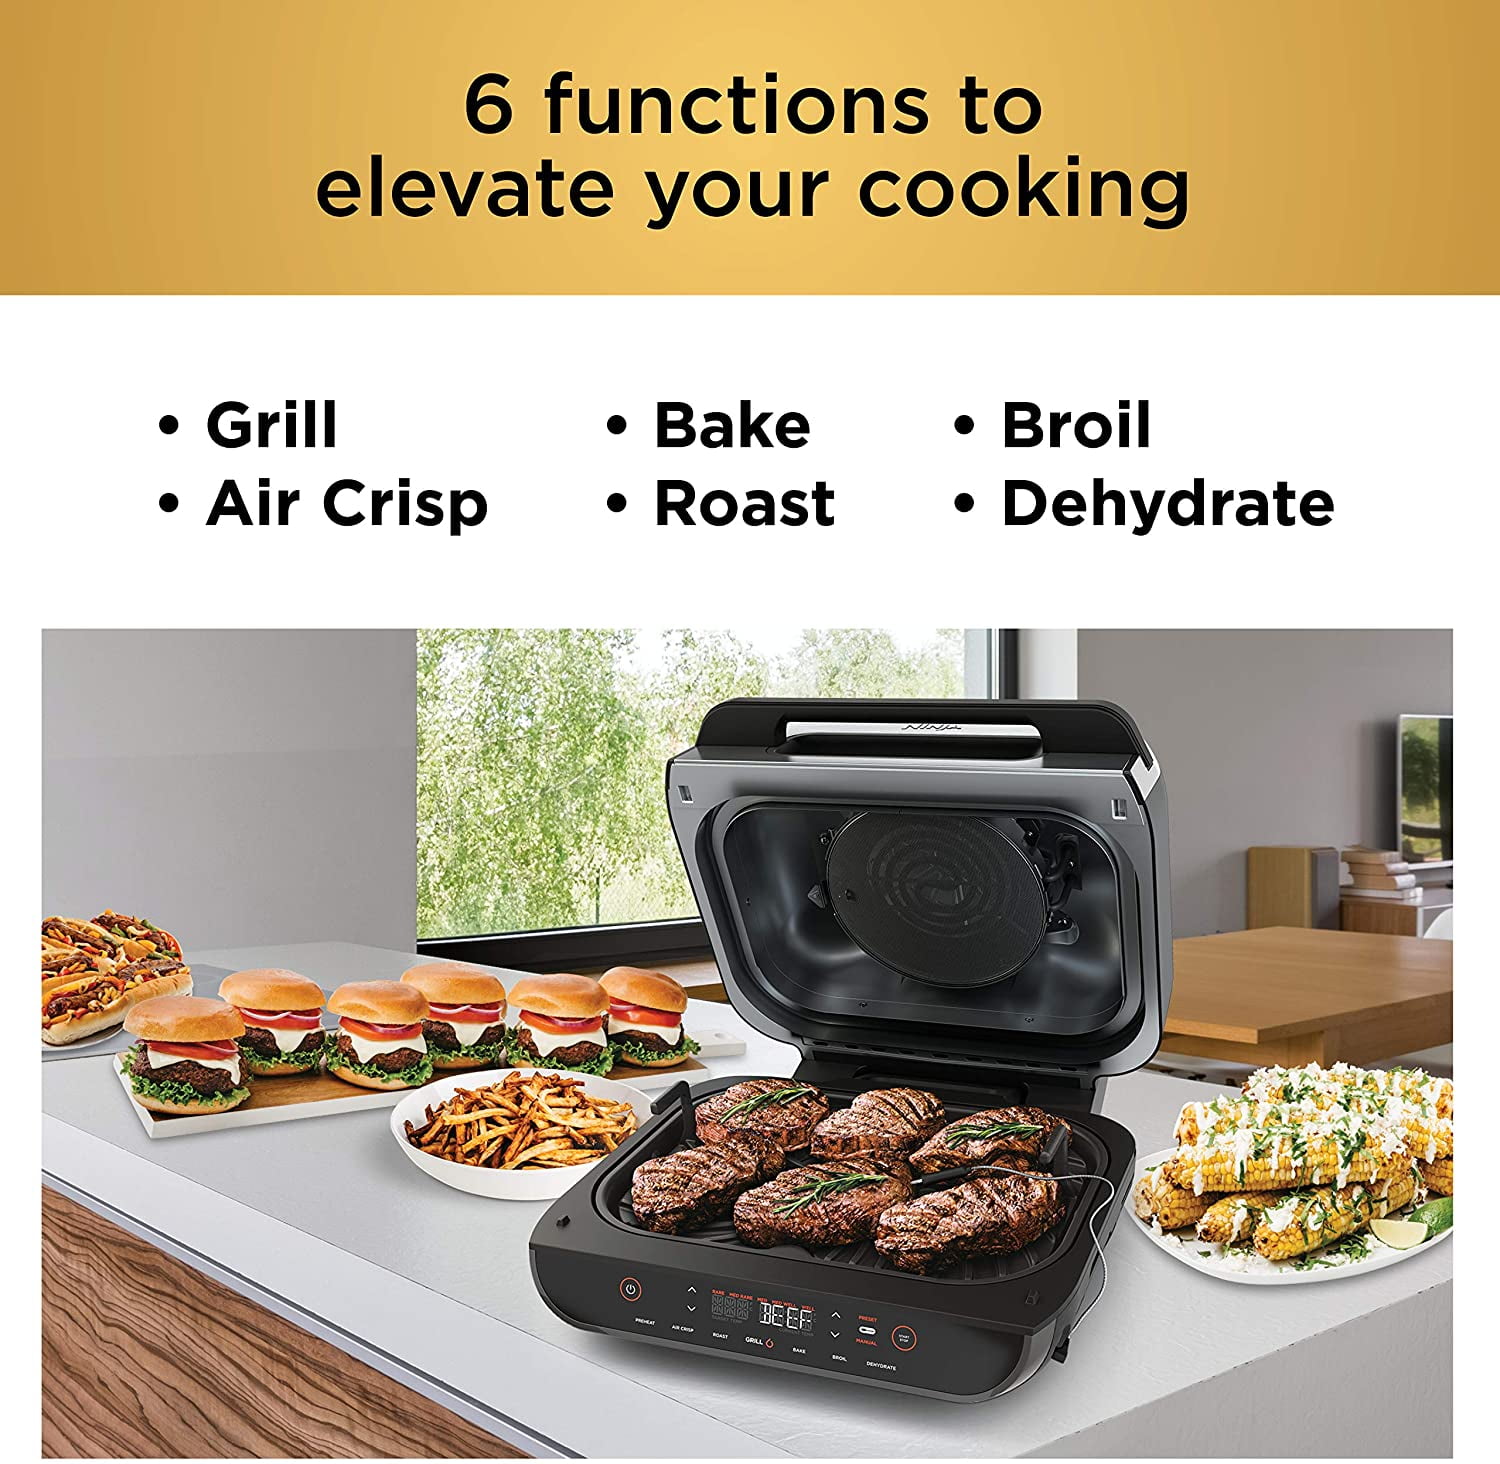 Ninja DG551 Foodi Smart XL 6-in-1 Indoor Grill with Air Fry, Roast, Bake,  Broil, & Dehydrate, Foodi Smart Thermometer, 2nd Generation, Black/Silver